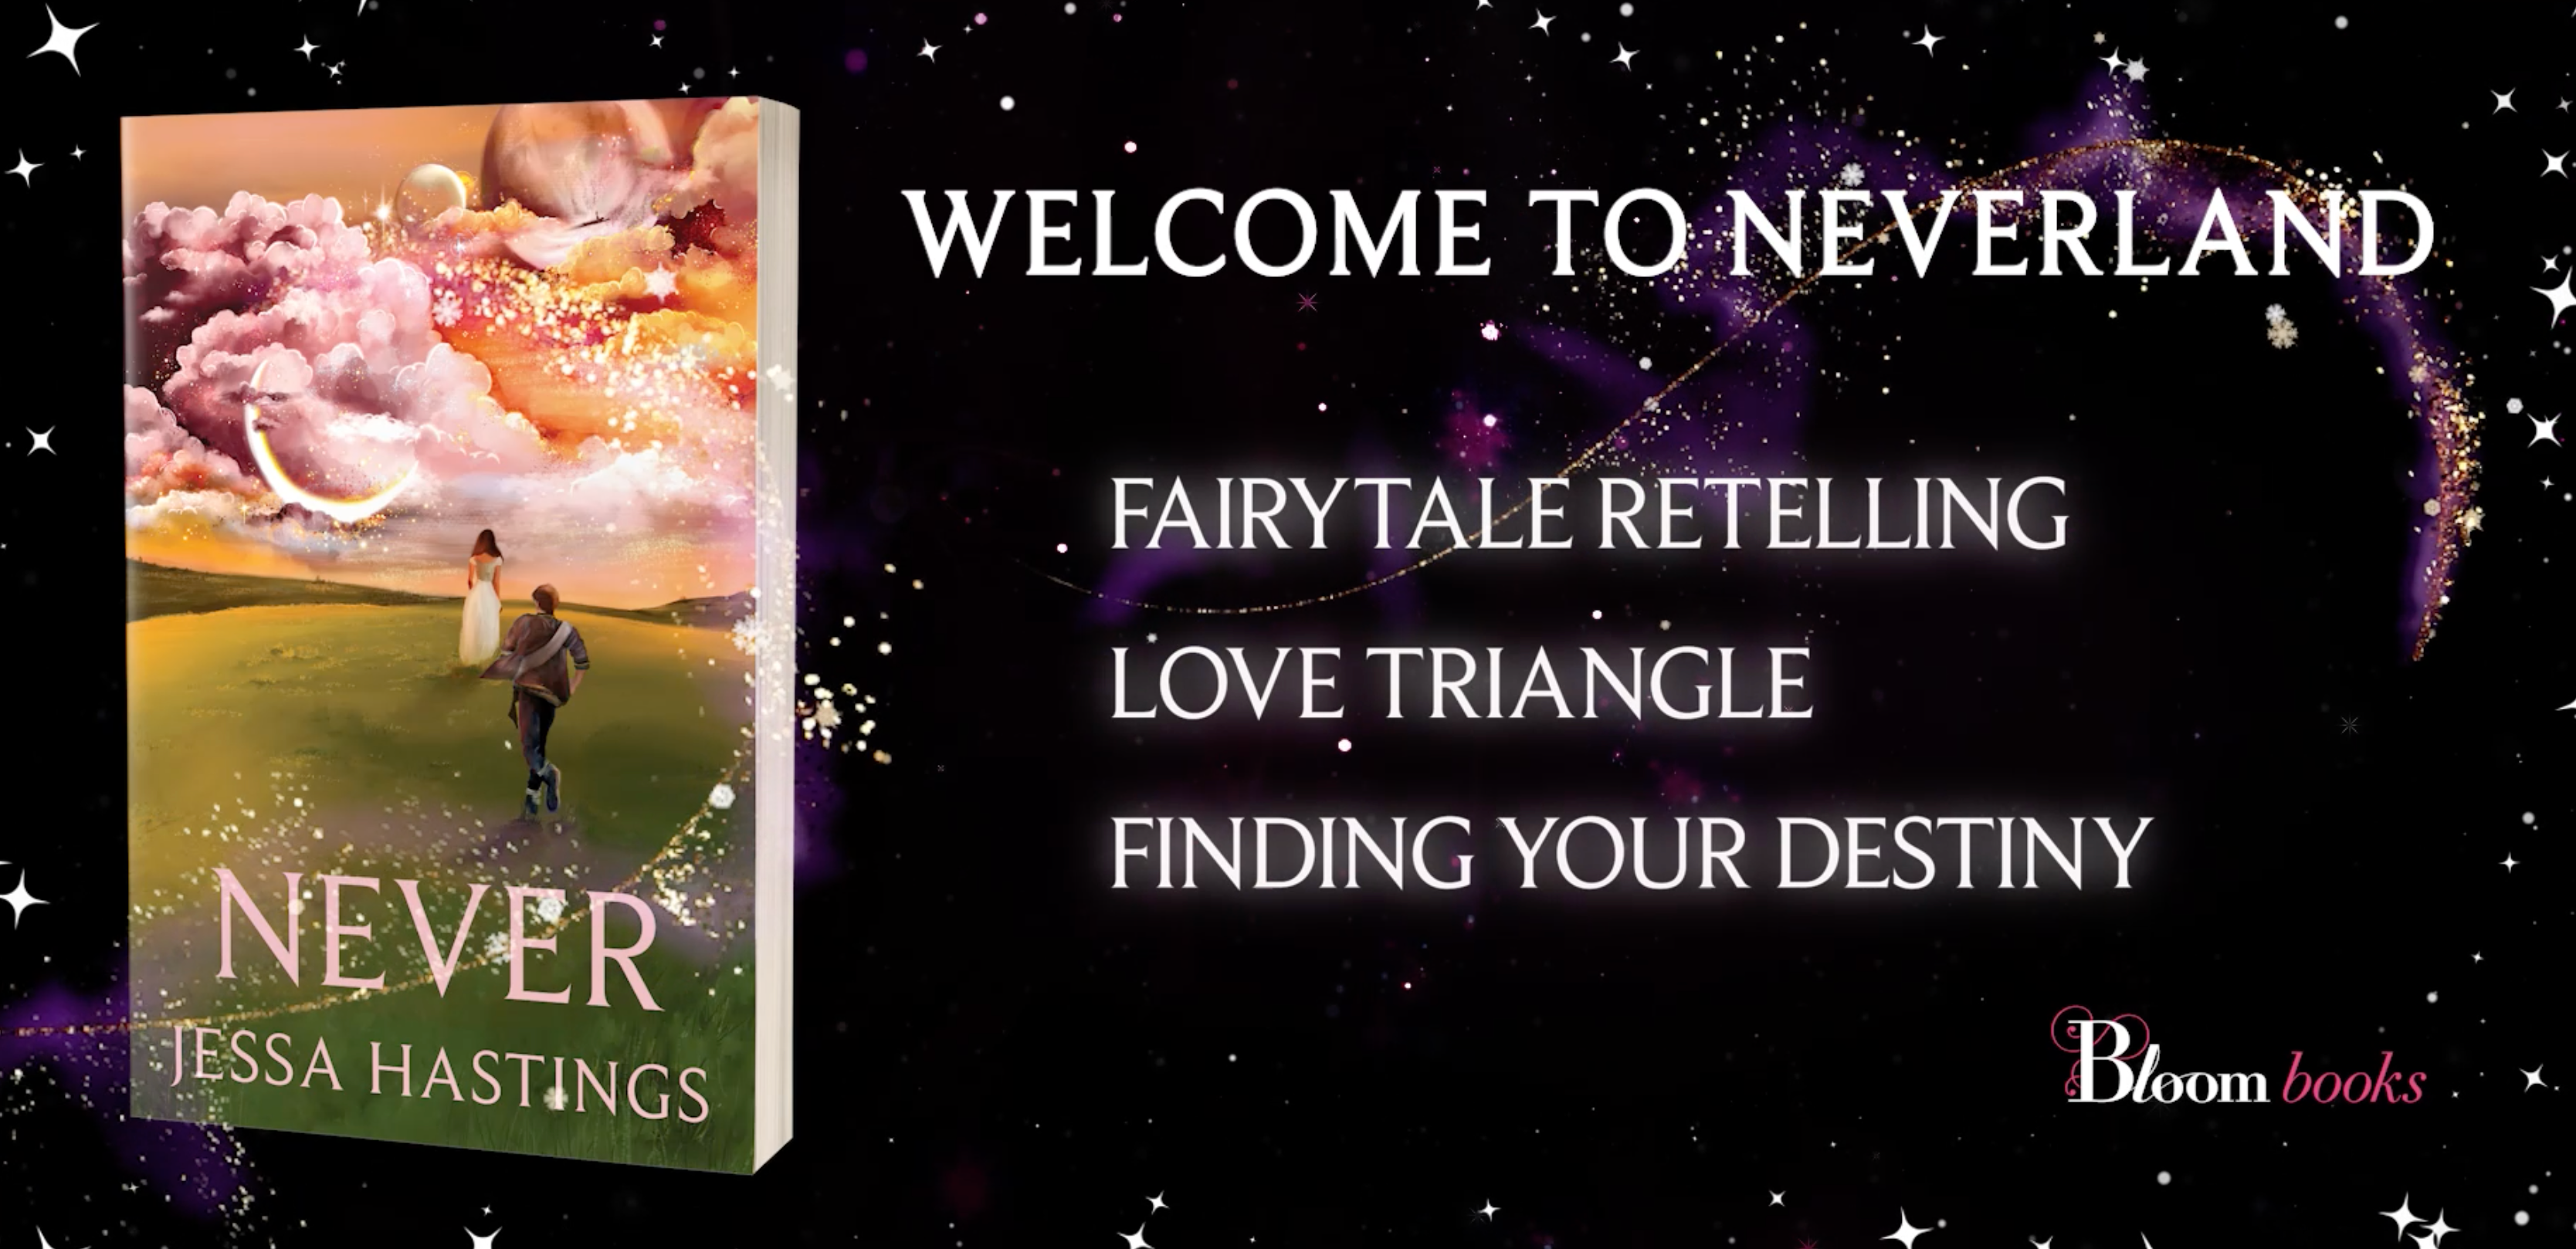 Welcome to Neverland. Fairy tale retelling. Love triangle. Finding your destiny.